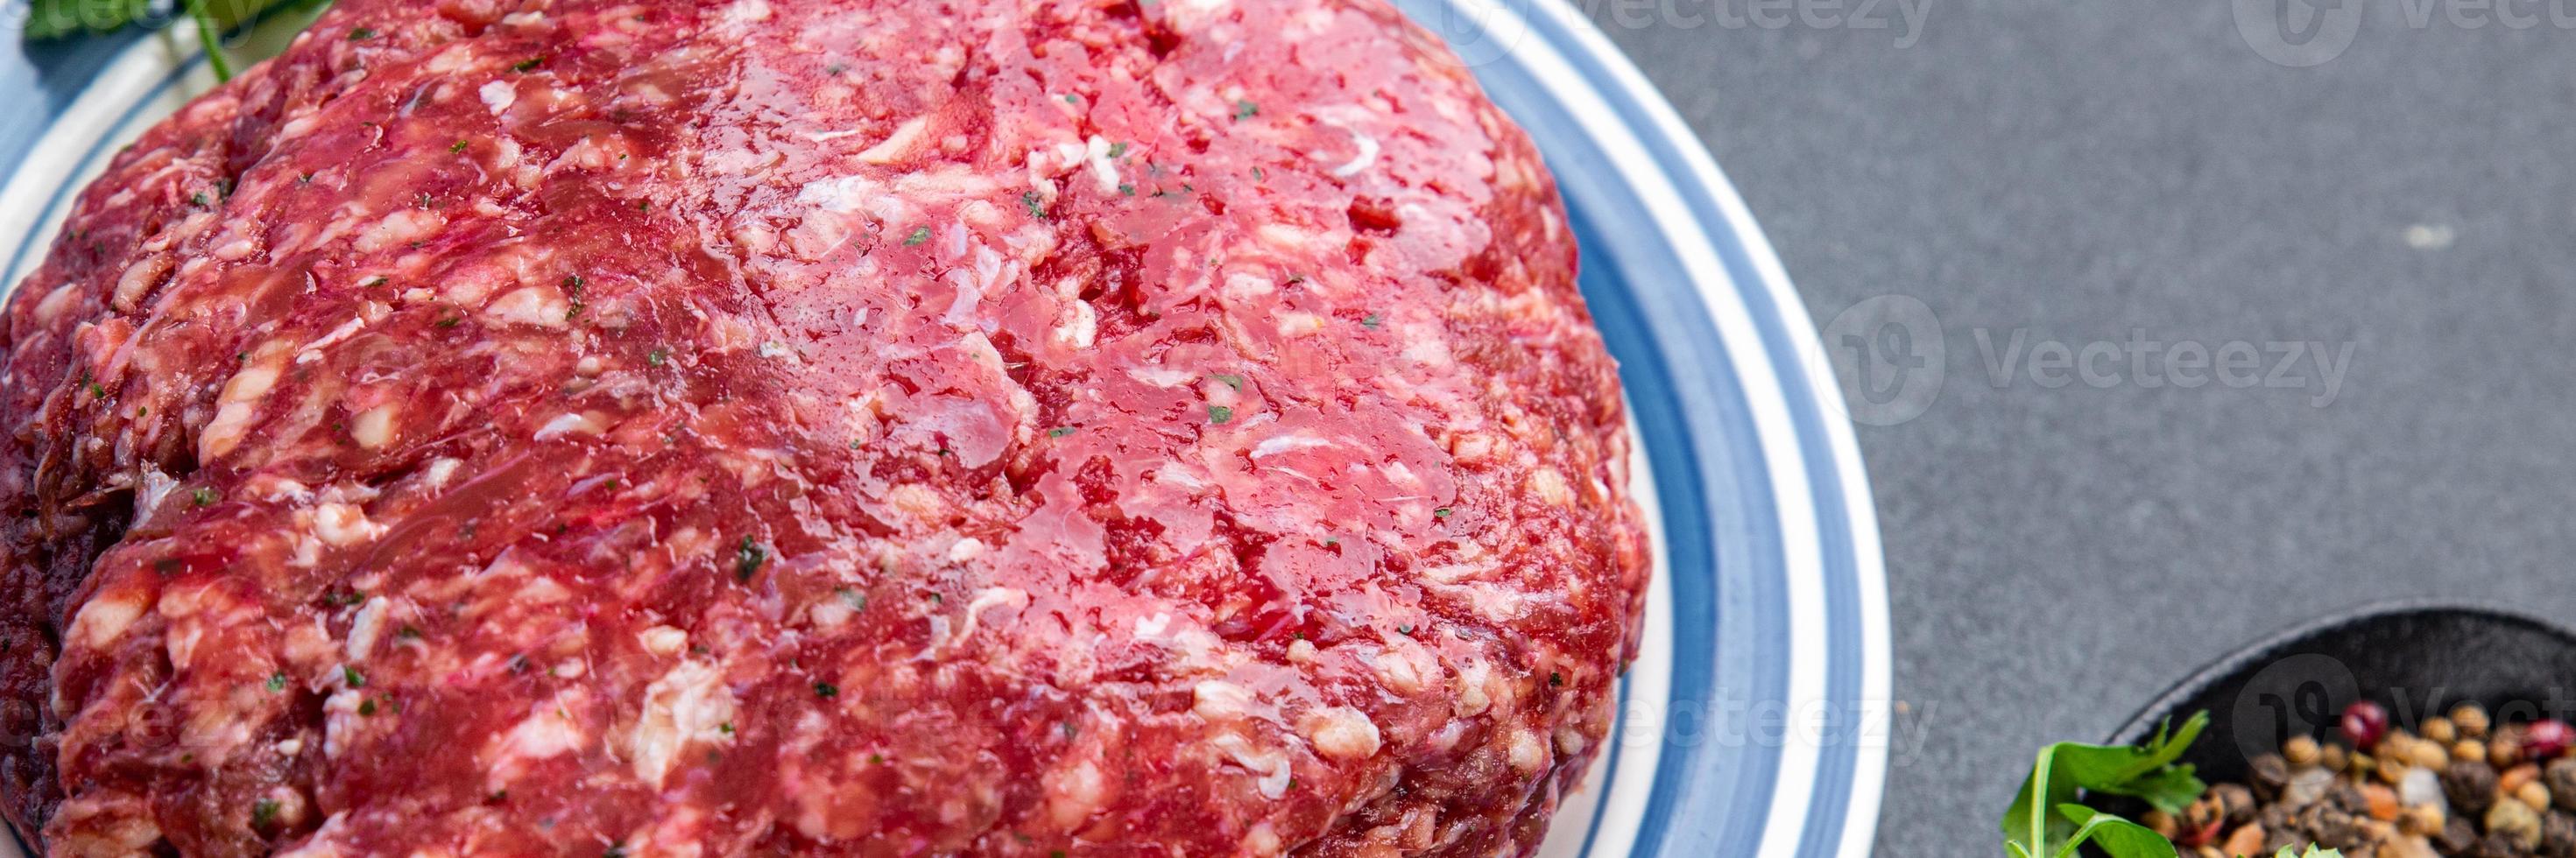 raw beef minced meat ground meat fresh ready to cook meal food snack on the table copy space food photo